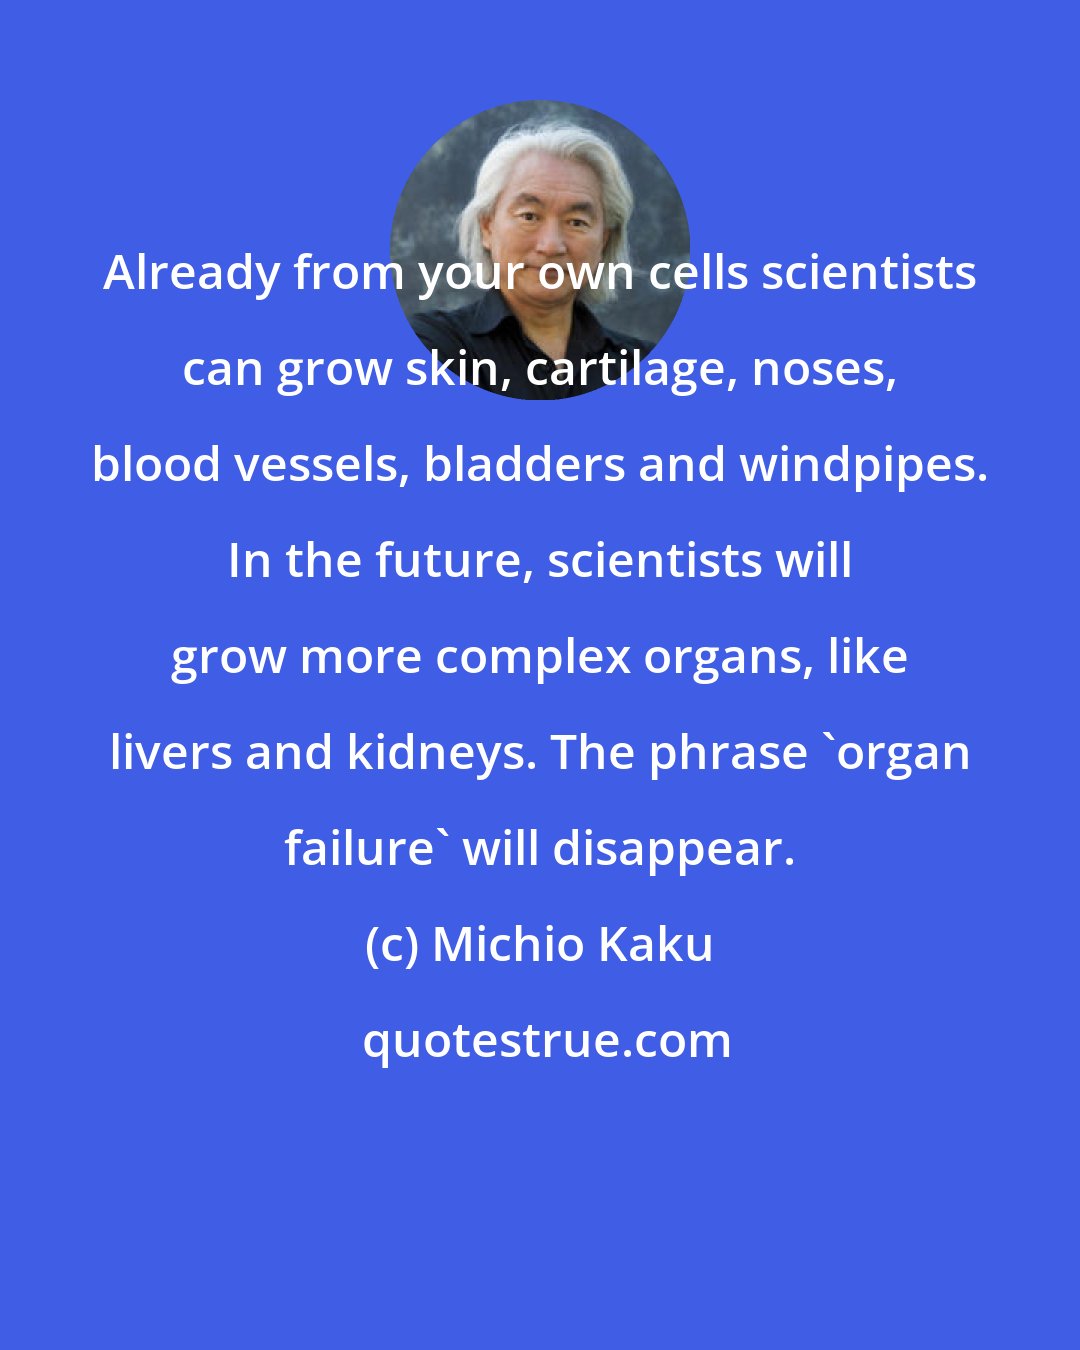 Michio Kaku: Already from your own cells scientists can grow skin, cartilage, noses, blood vessels, bladders and windpipes. In the future, scientists will grow more complex organs, like livers and kidneys. The phrase 'organ failure' will disappear.